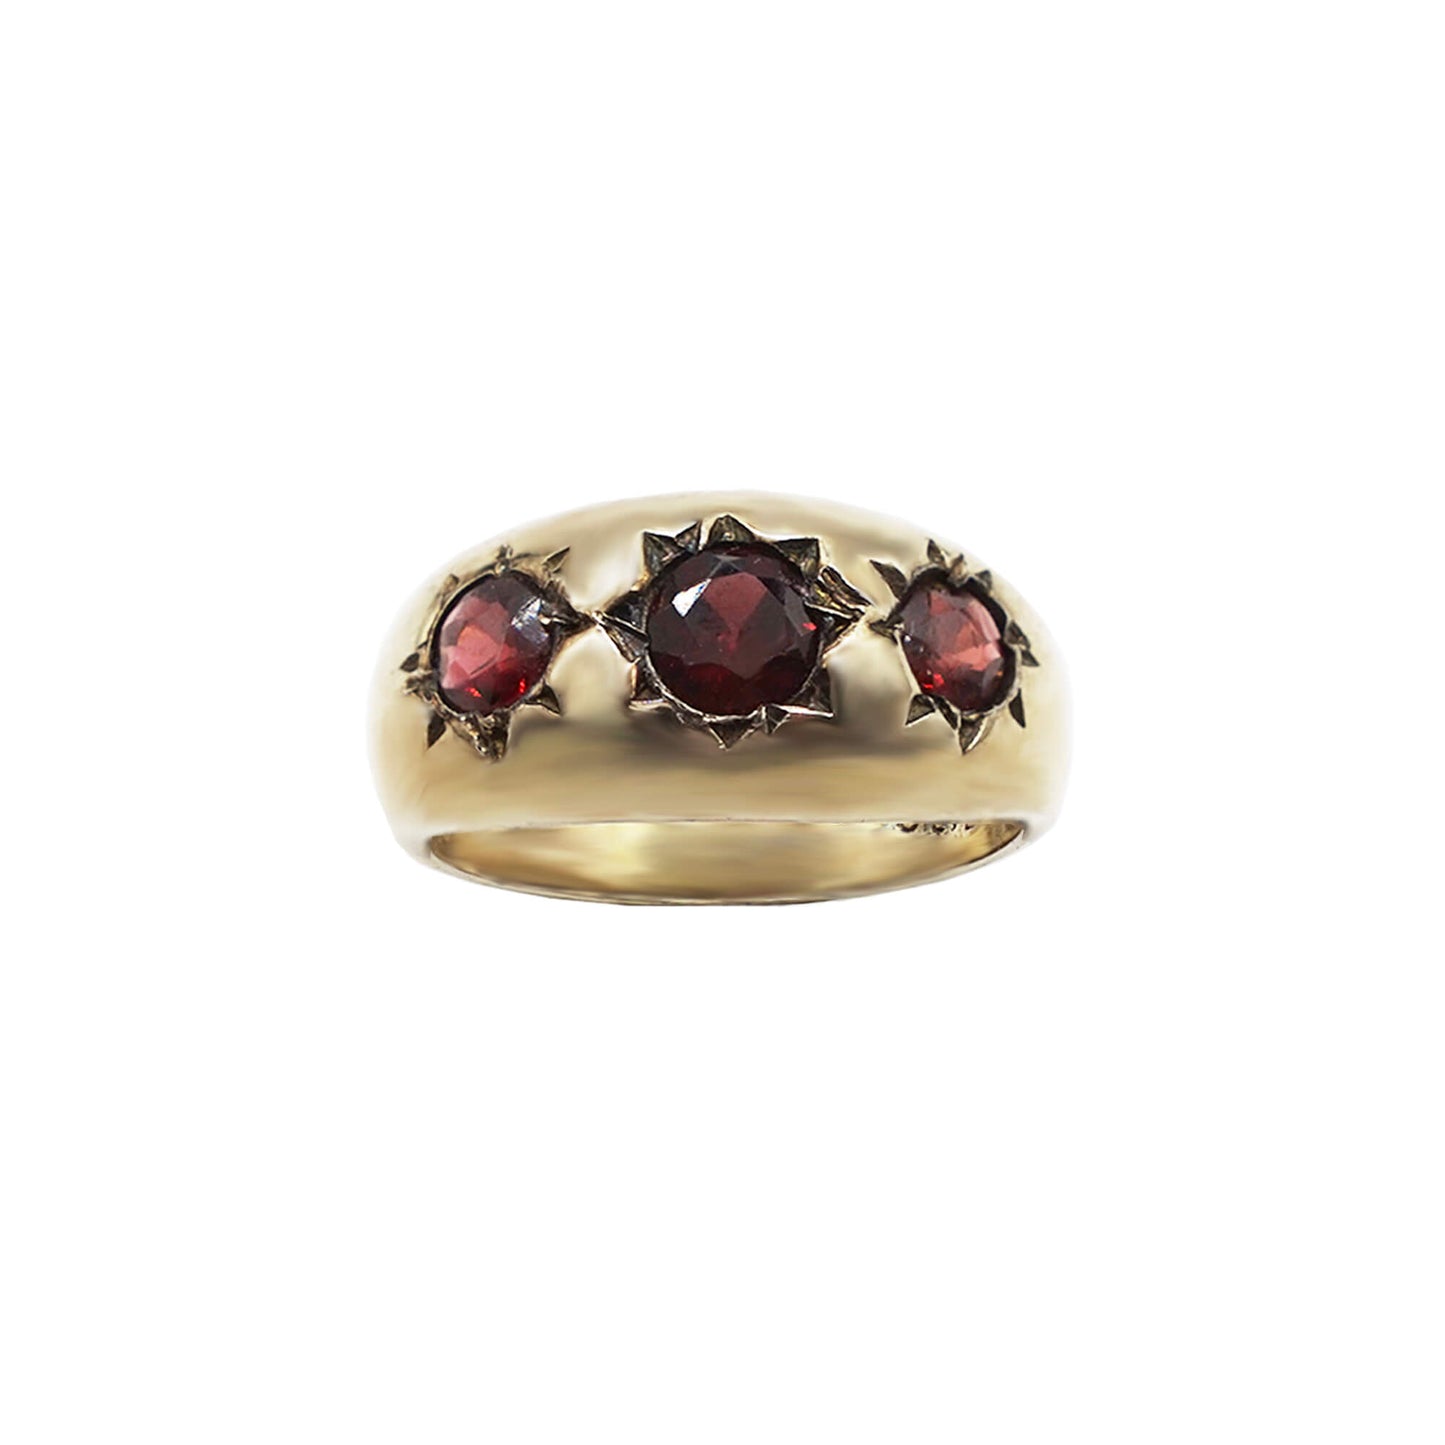 chunky 9k gold plated ring with 3 large garnets set in a starburst.